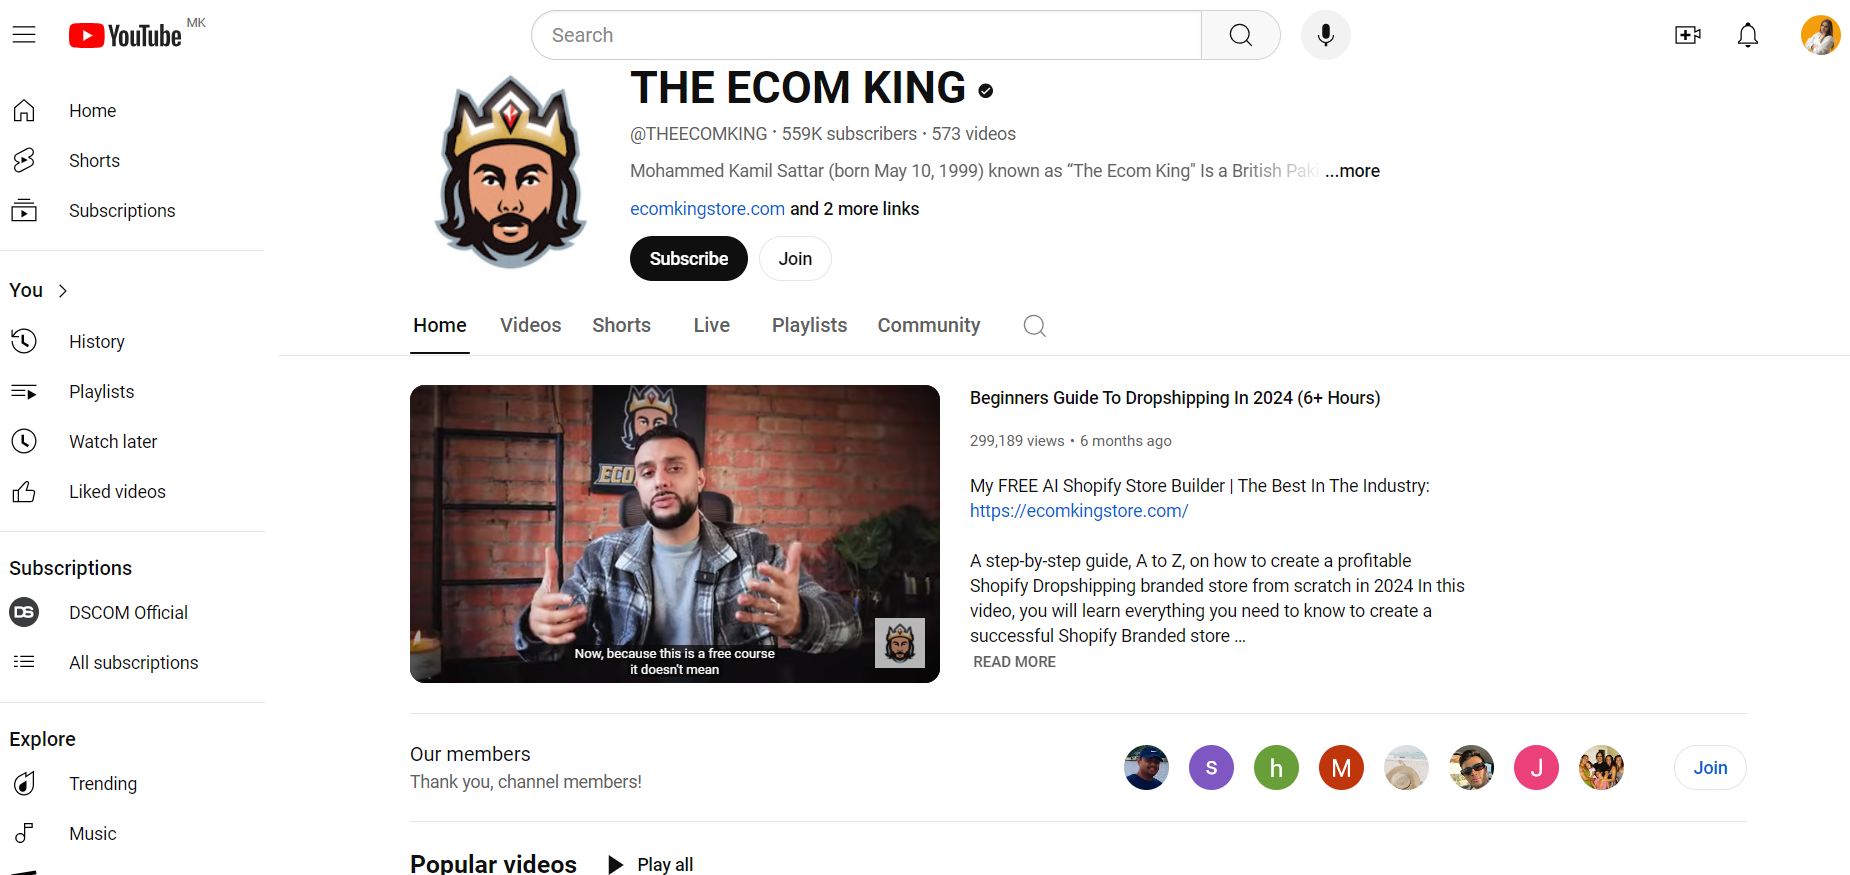 THE ECOM KING’s YouTube course. This course offers over 6 hours of detailed content, covering everything needed to start and run a successful Shopify dropshipping business.   From setting up your Shopify store to automating order fulfillment and running effective ads on social media, this course leaves no stone unturned.